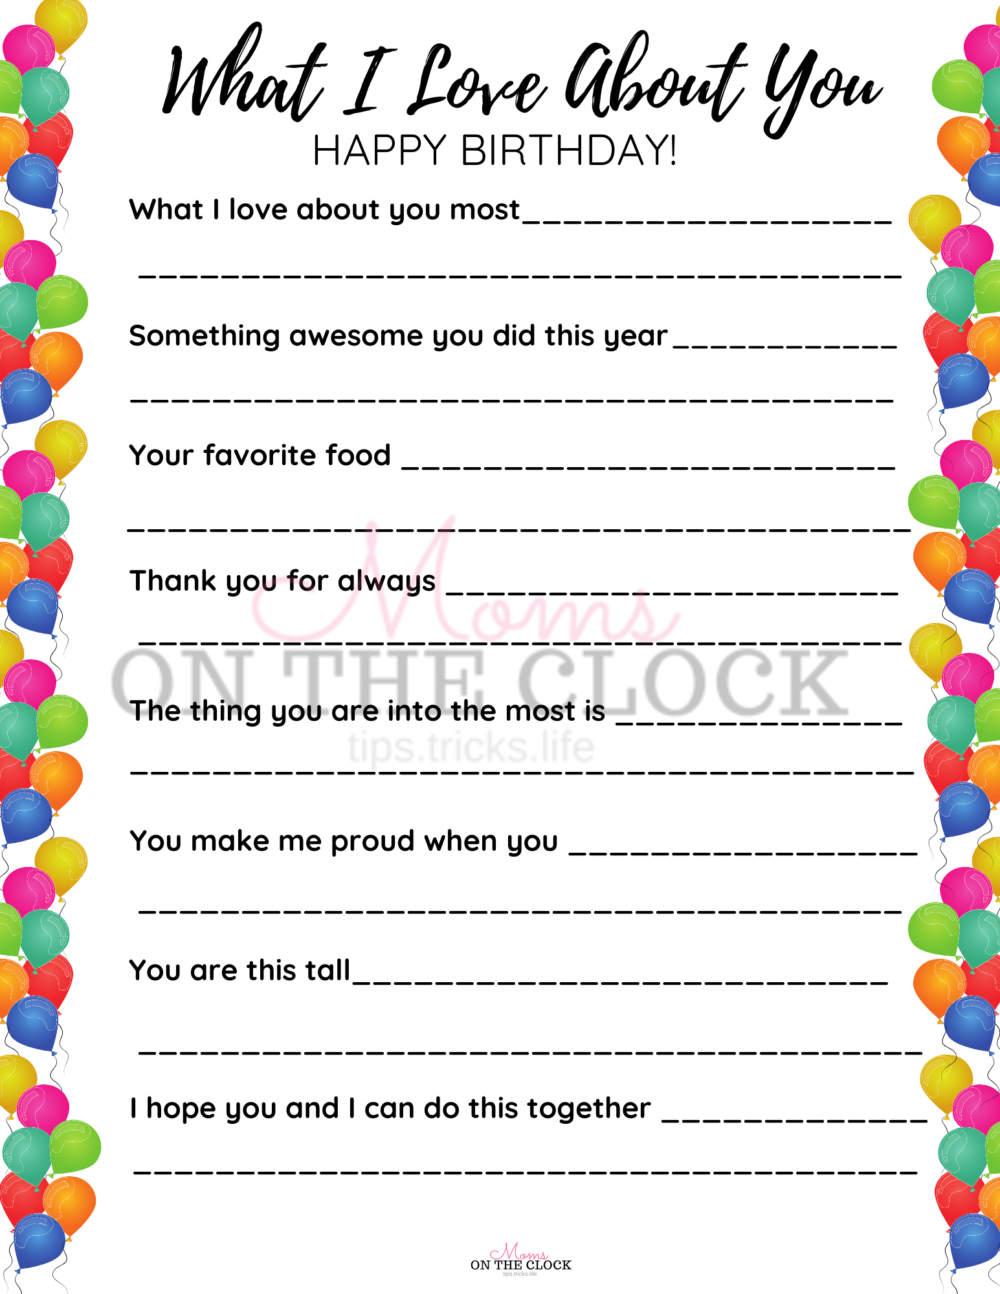 Happy Birthday Banner Printable -"Why I Love You"